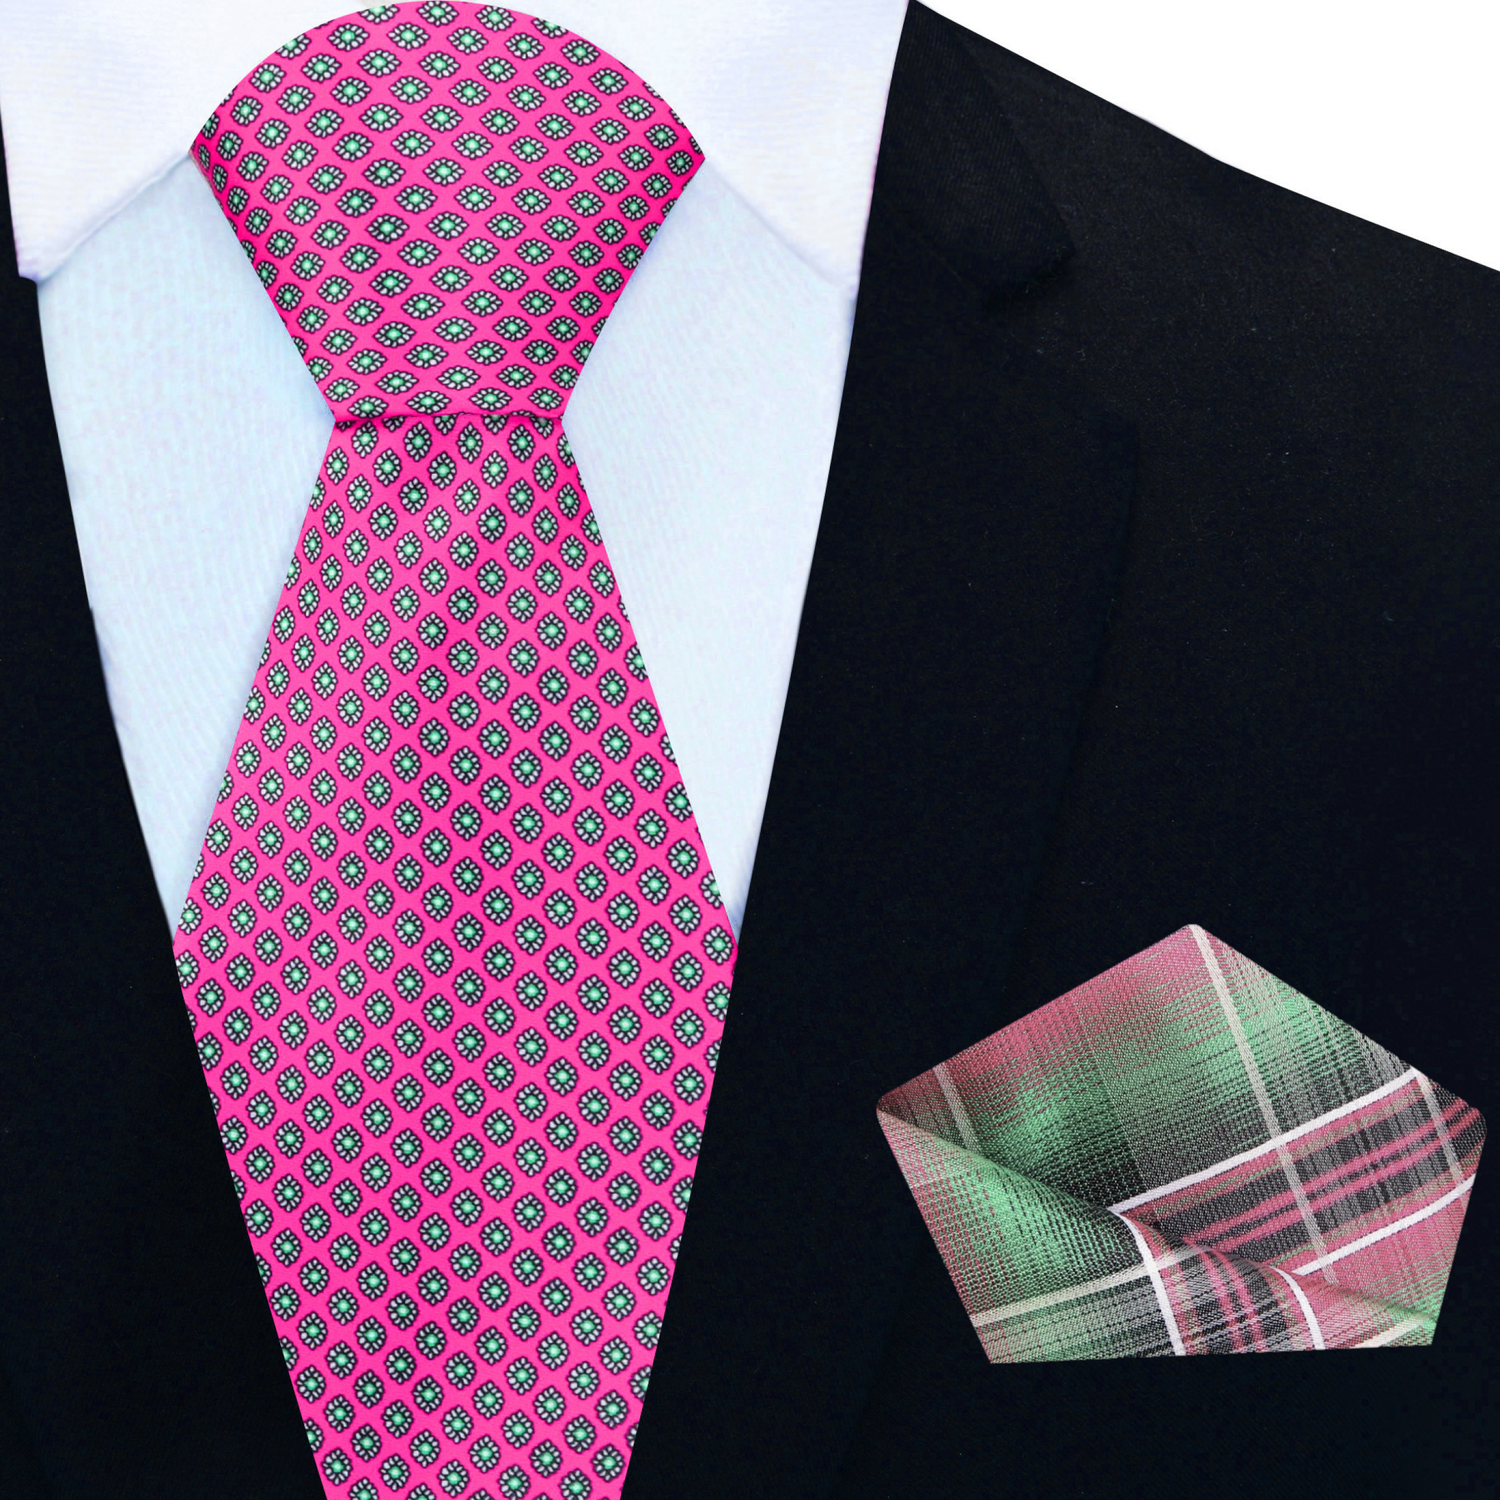 View 2: Pink Medallions Necktie and Plaid Square